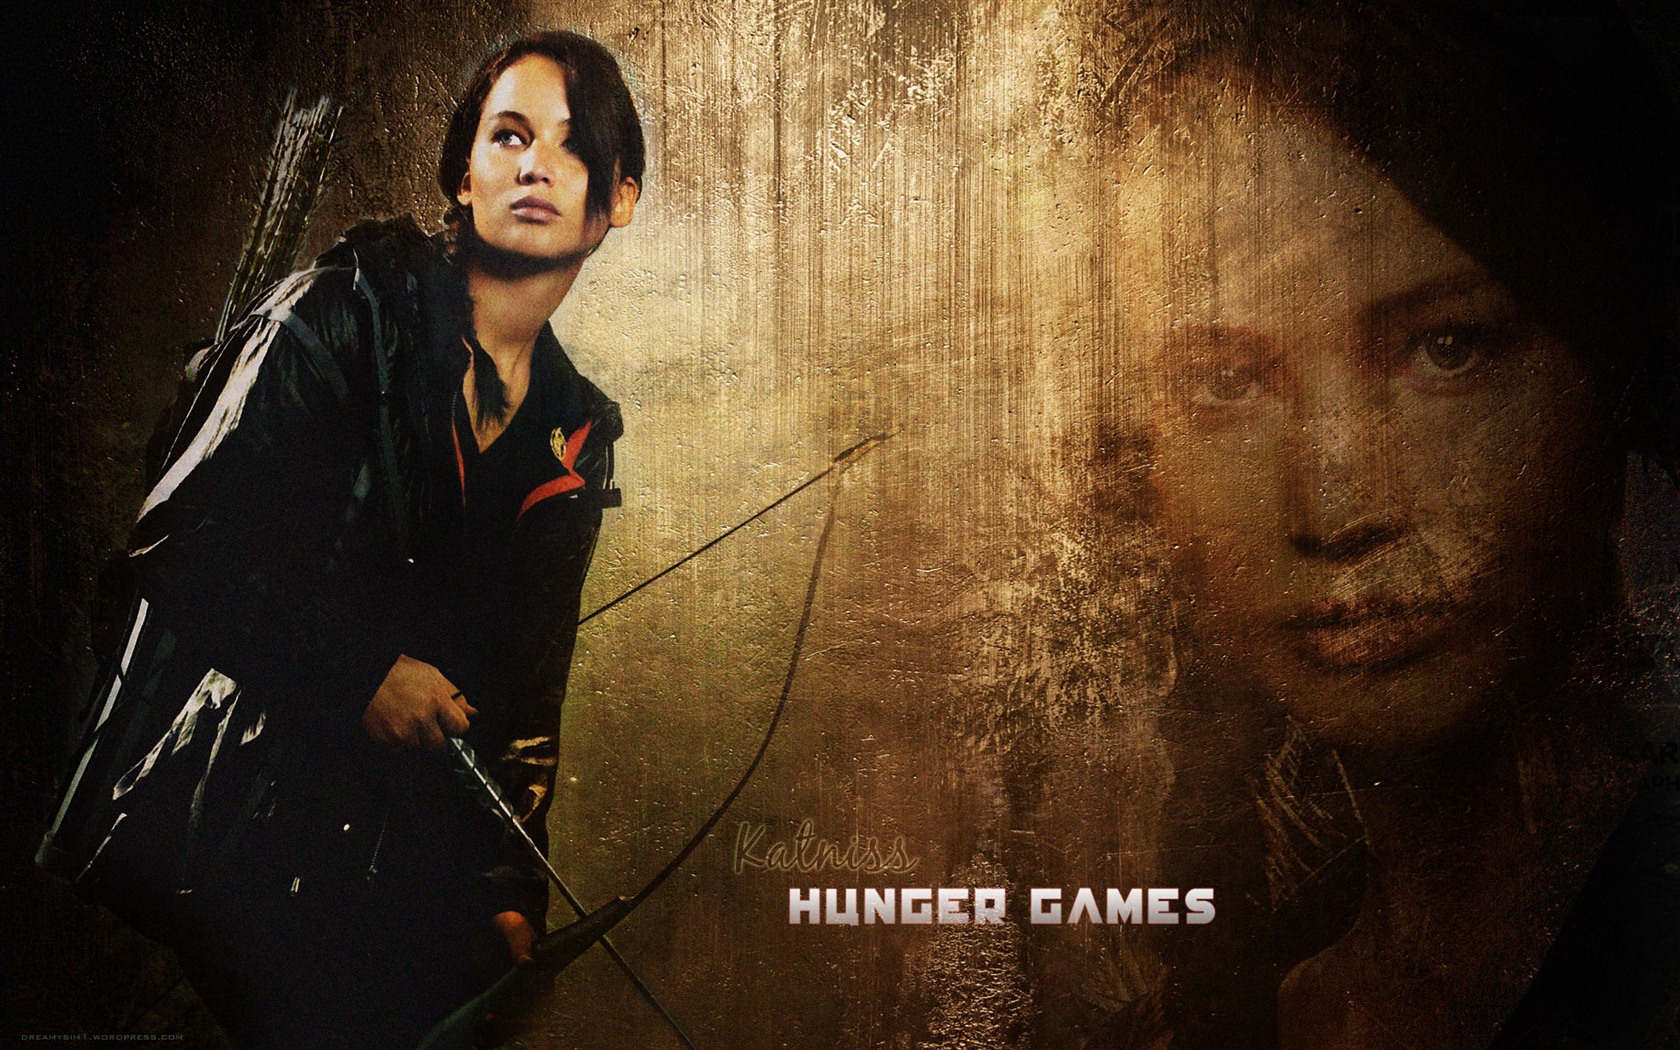 The Hunger Games HD wallpapers #8 - 1680x1050